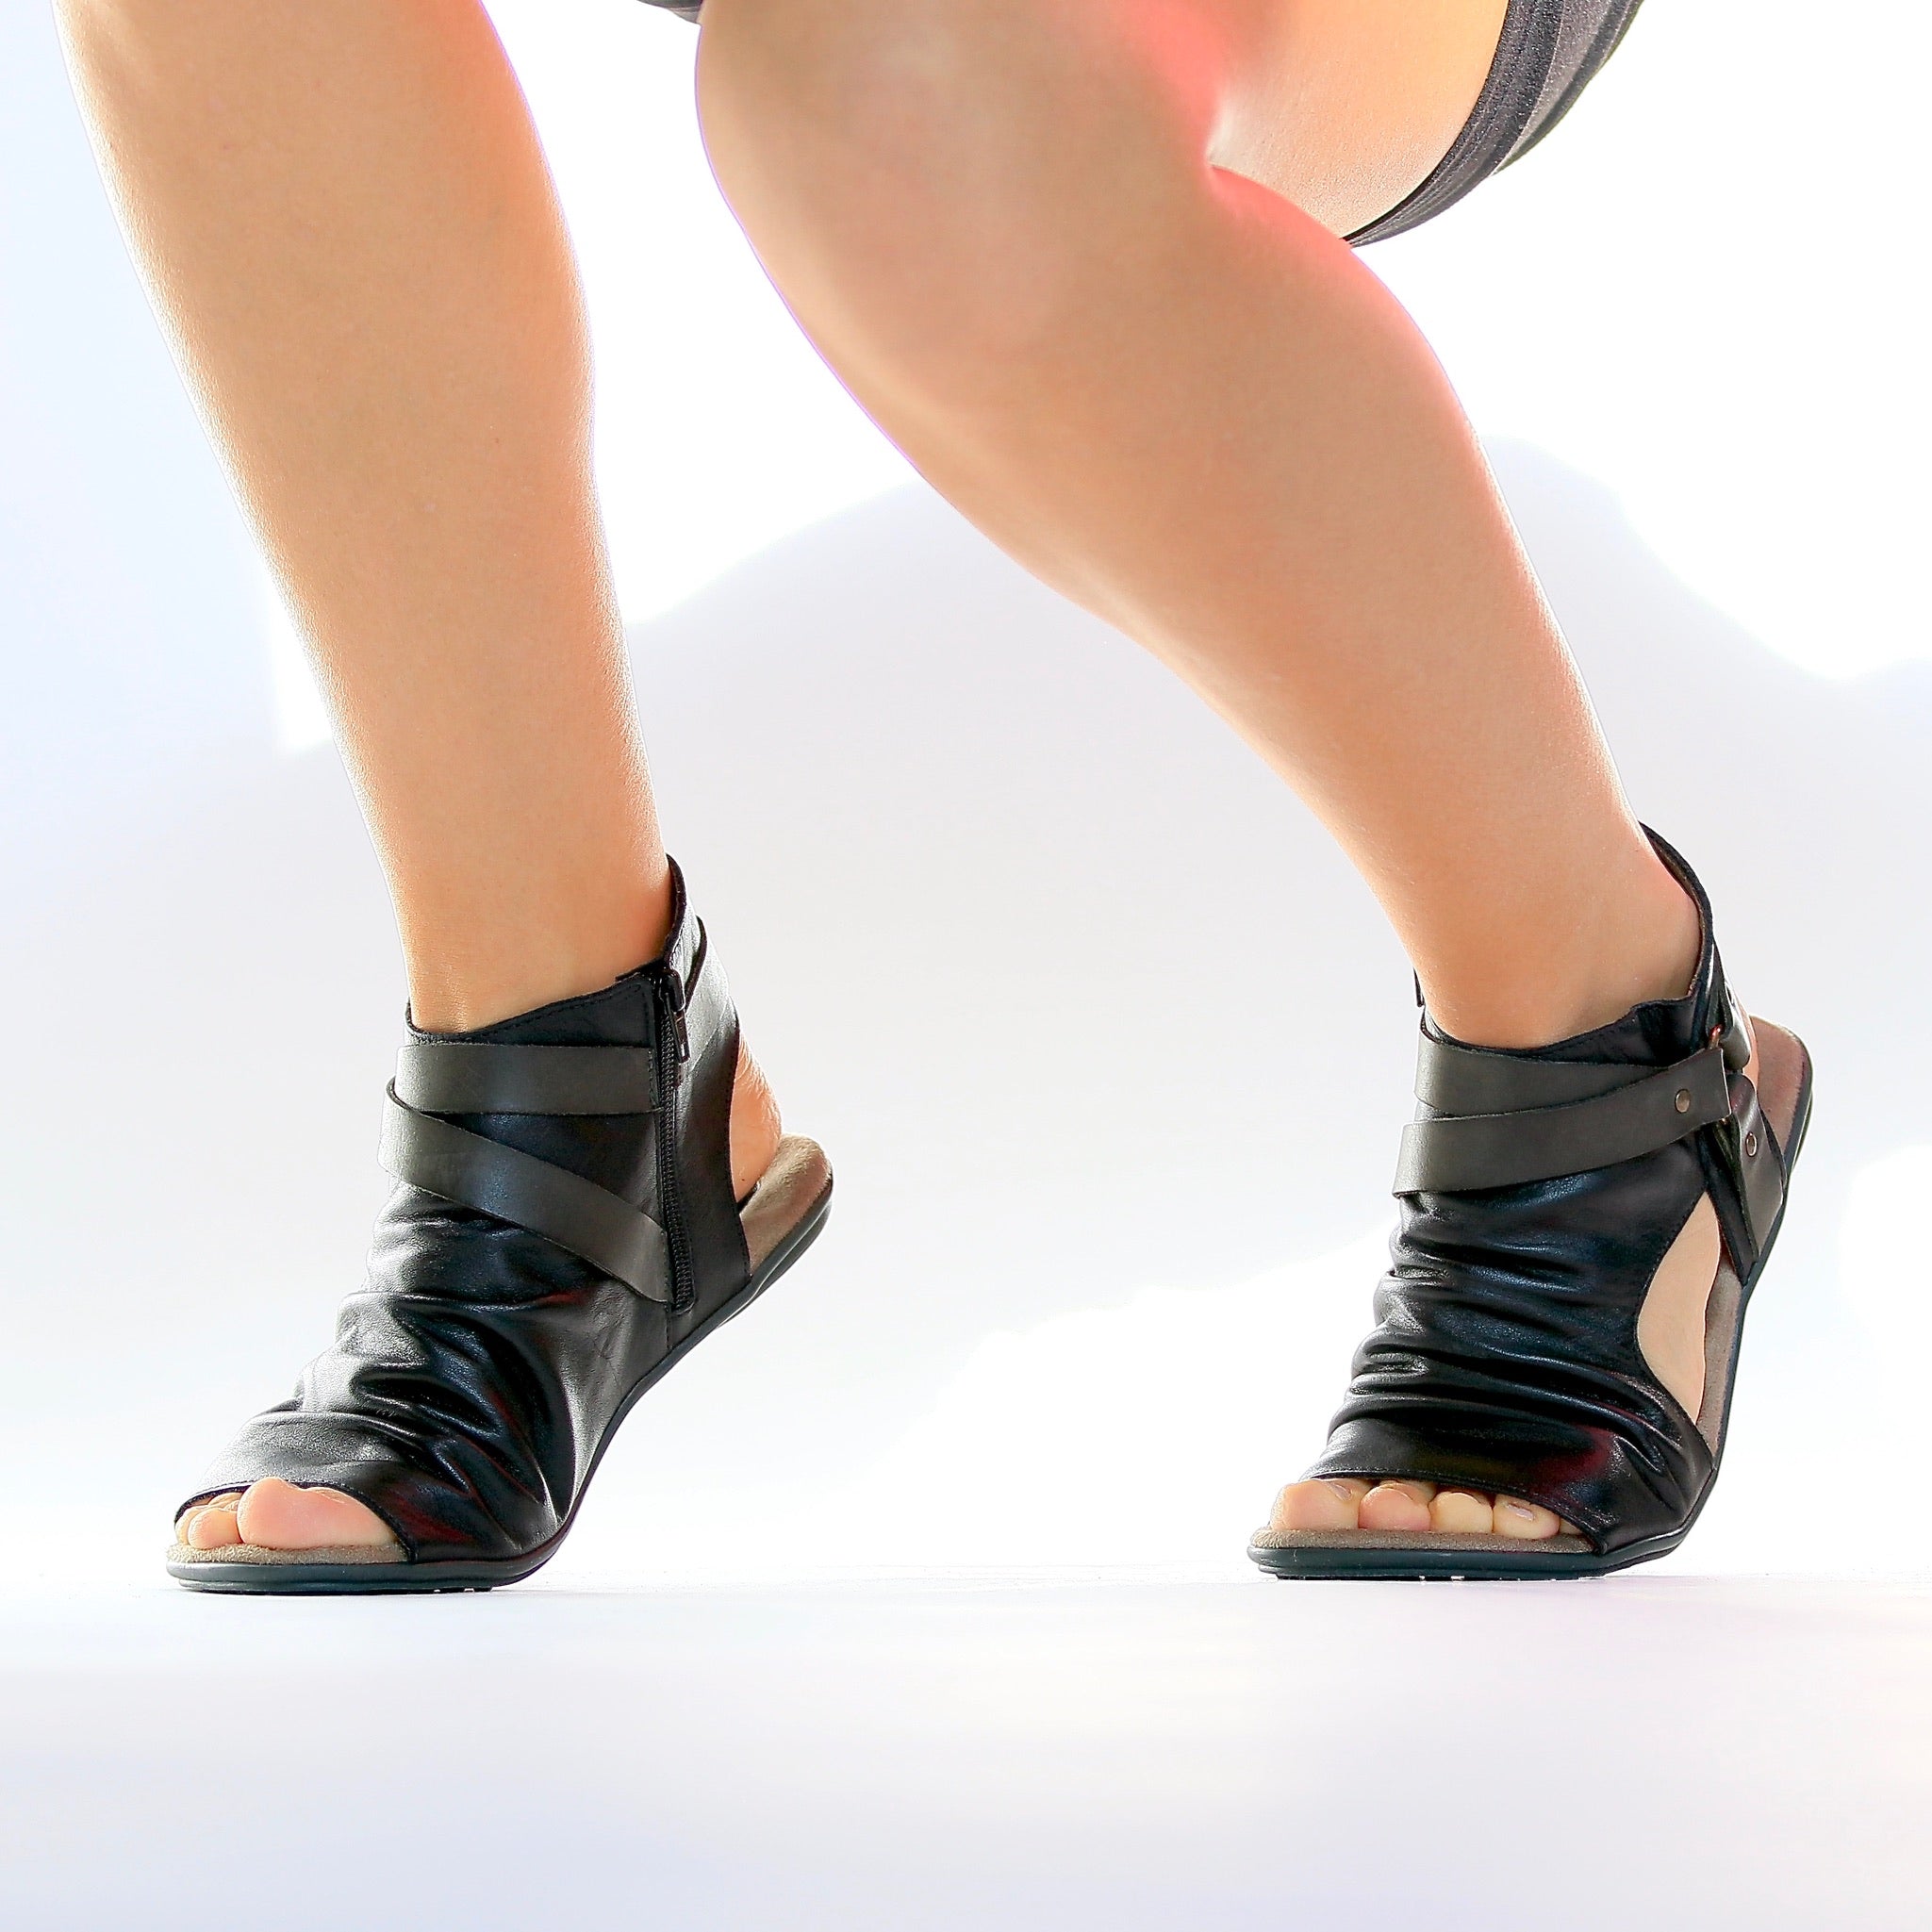 womens gladiator shoes